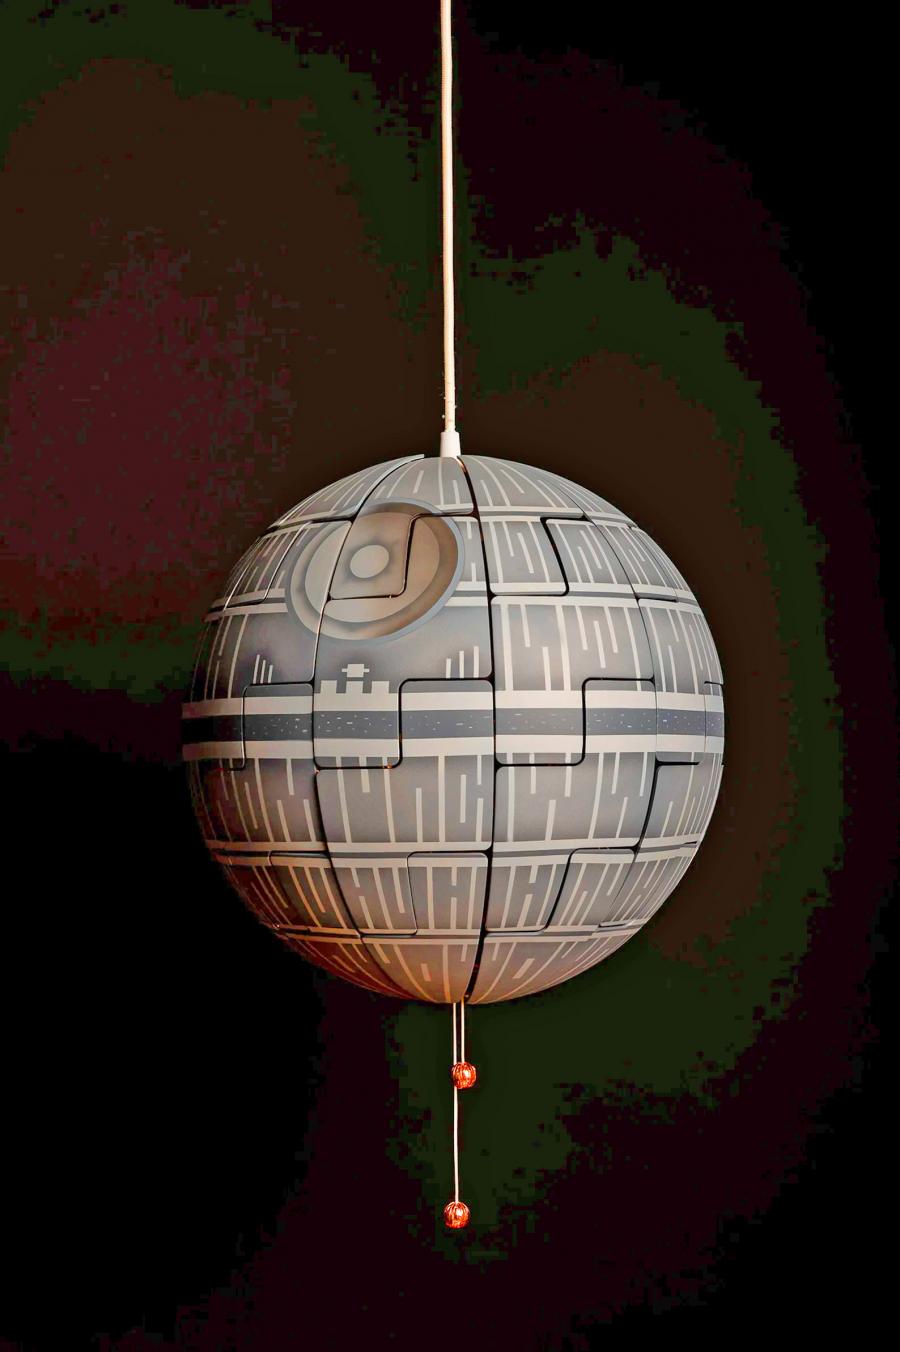 Exploding Death Star Lamp